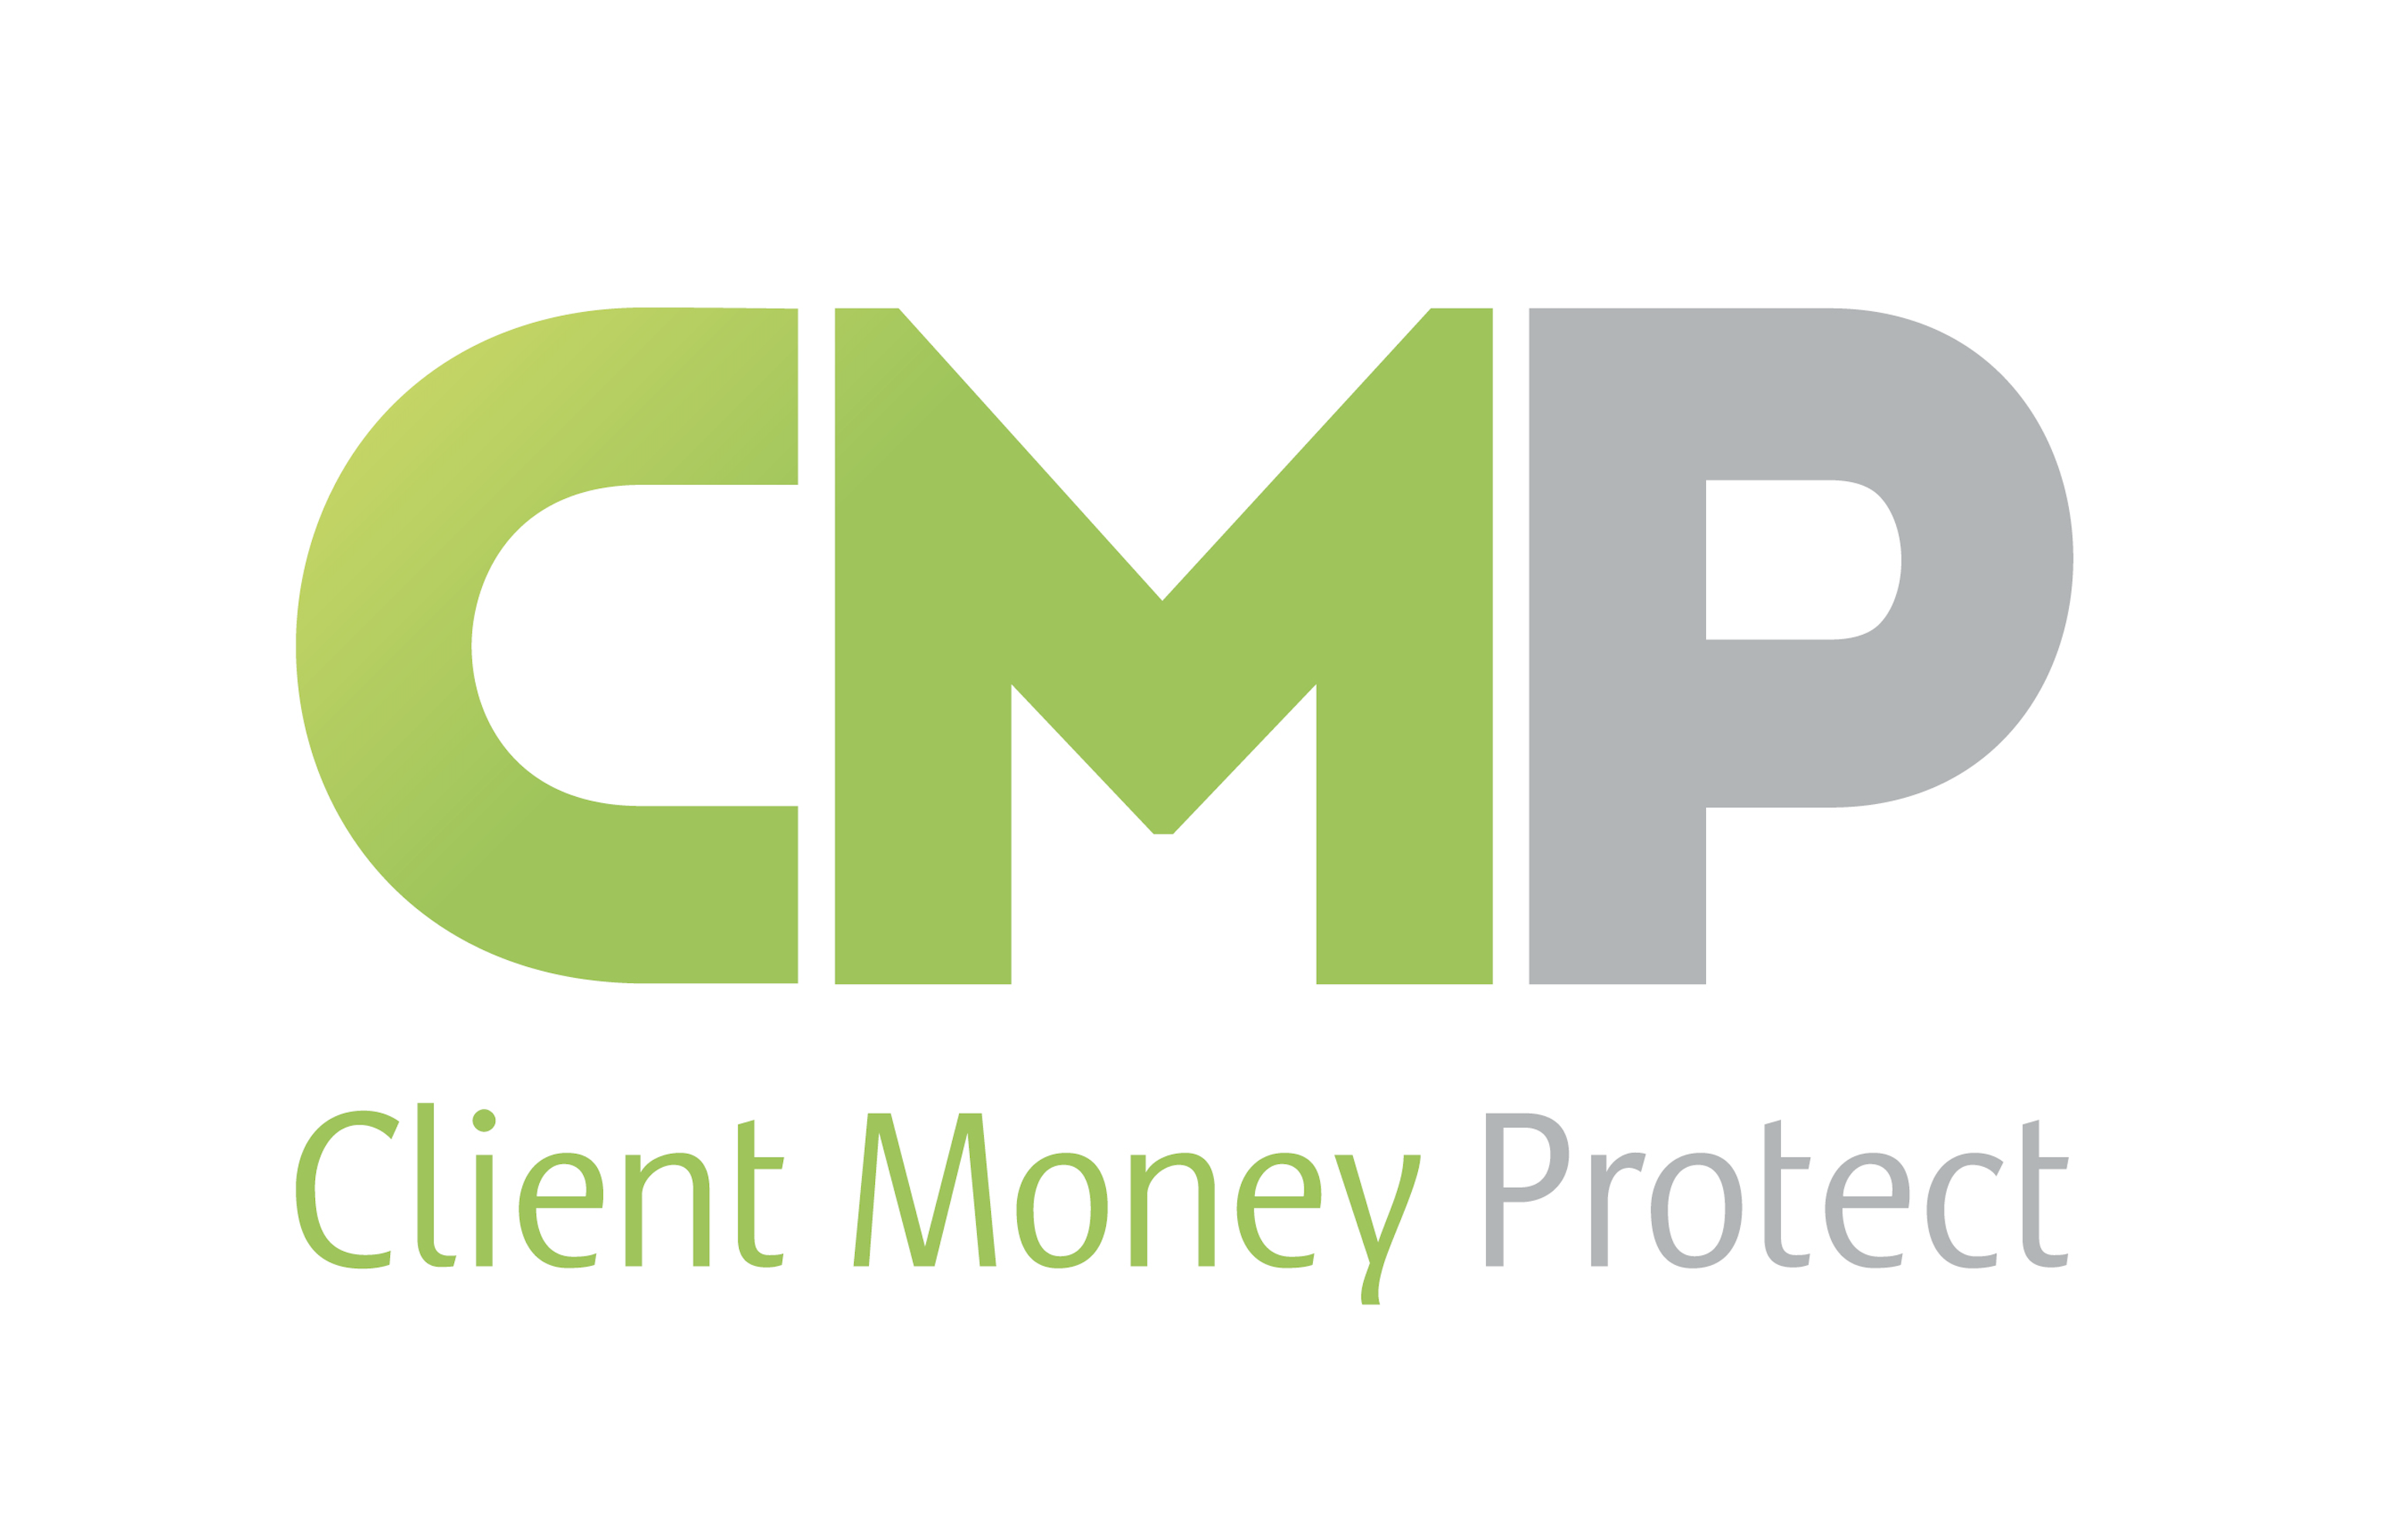 Clinet Money Protect